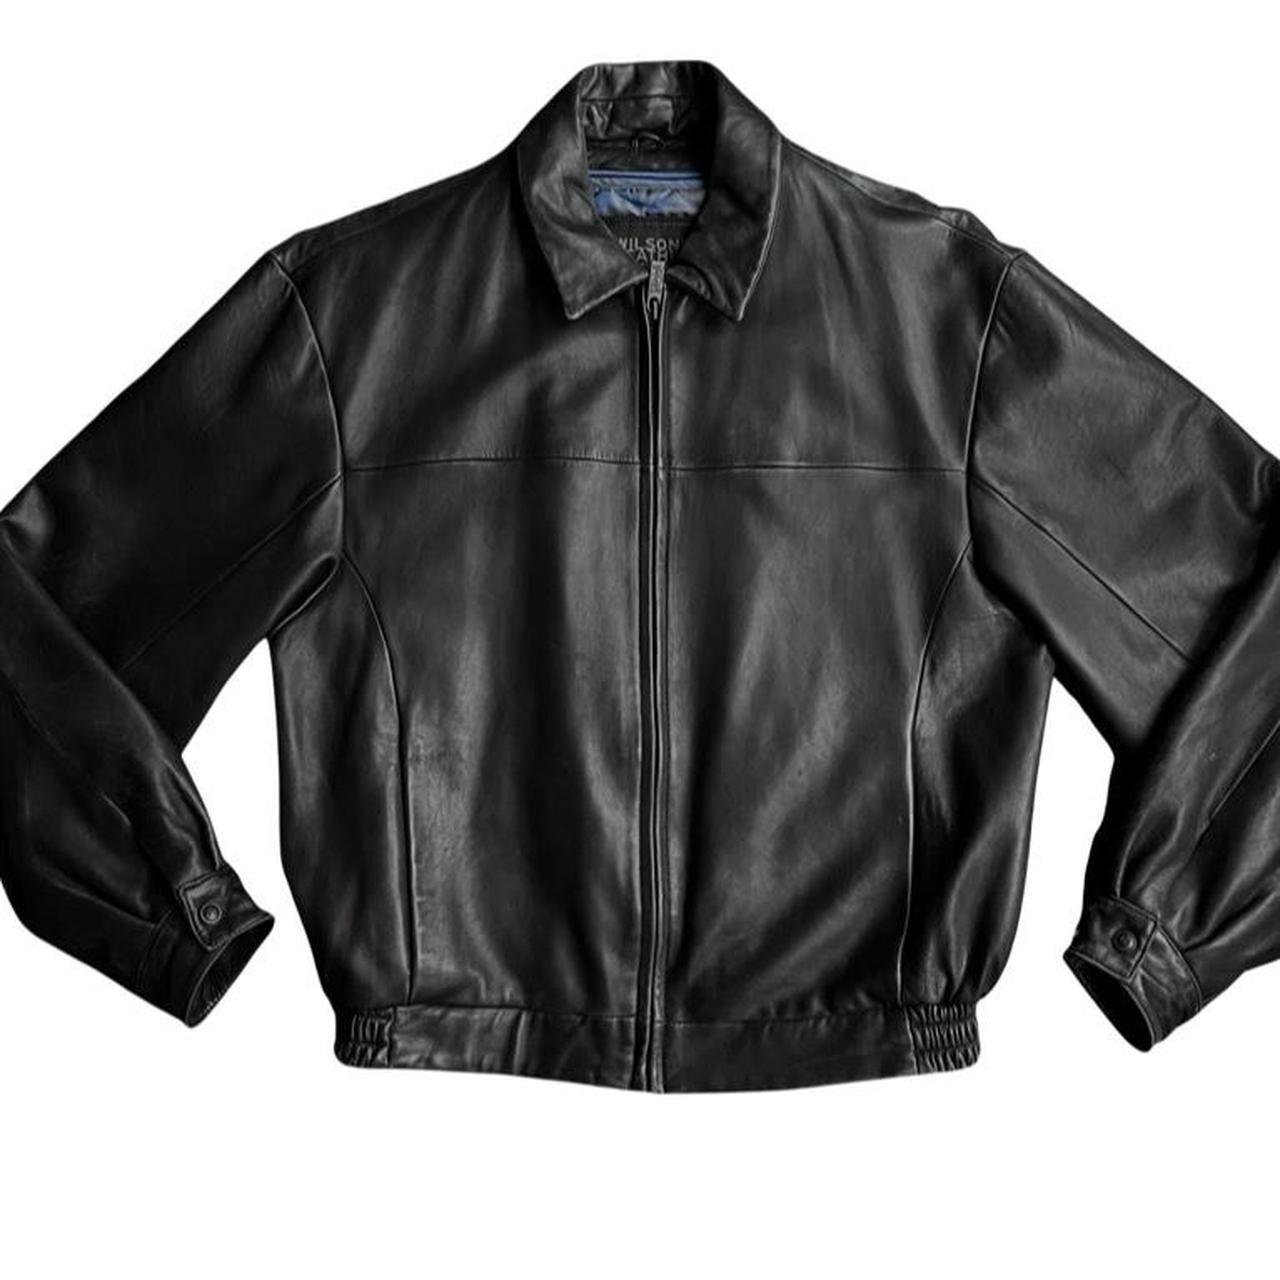 Wilson’s Leather Men's Black and Blue Jacket